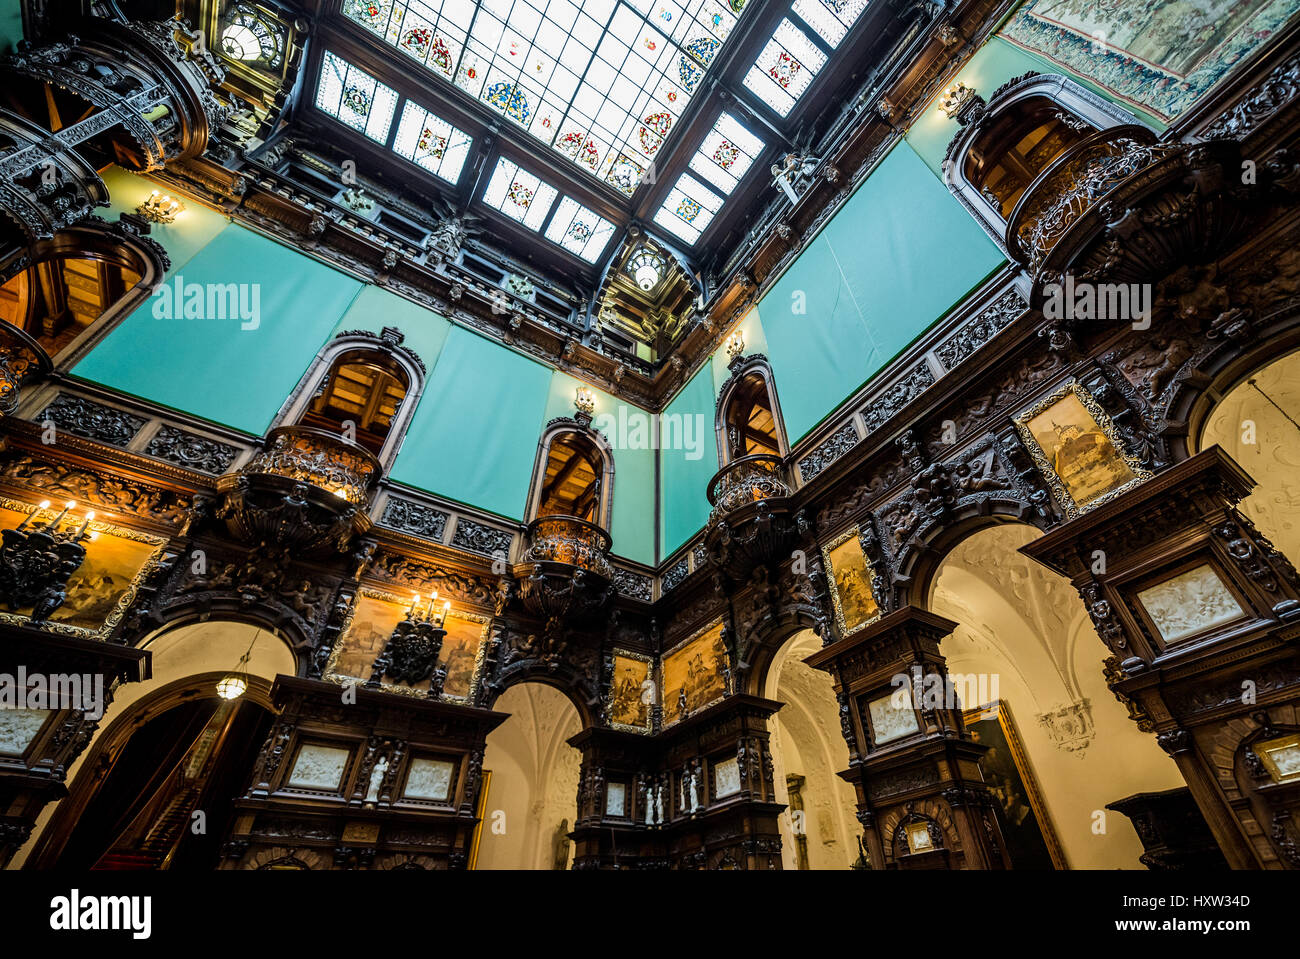 Hall of Honour (Holul de Onoare) and glass ceiling in Peles Palace, former royal castle, built between 1873 and 1914, located near Sinaia in Romania Stock Photo